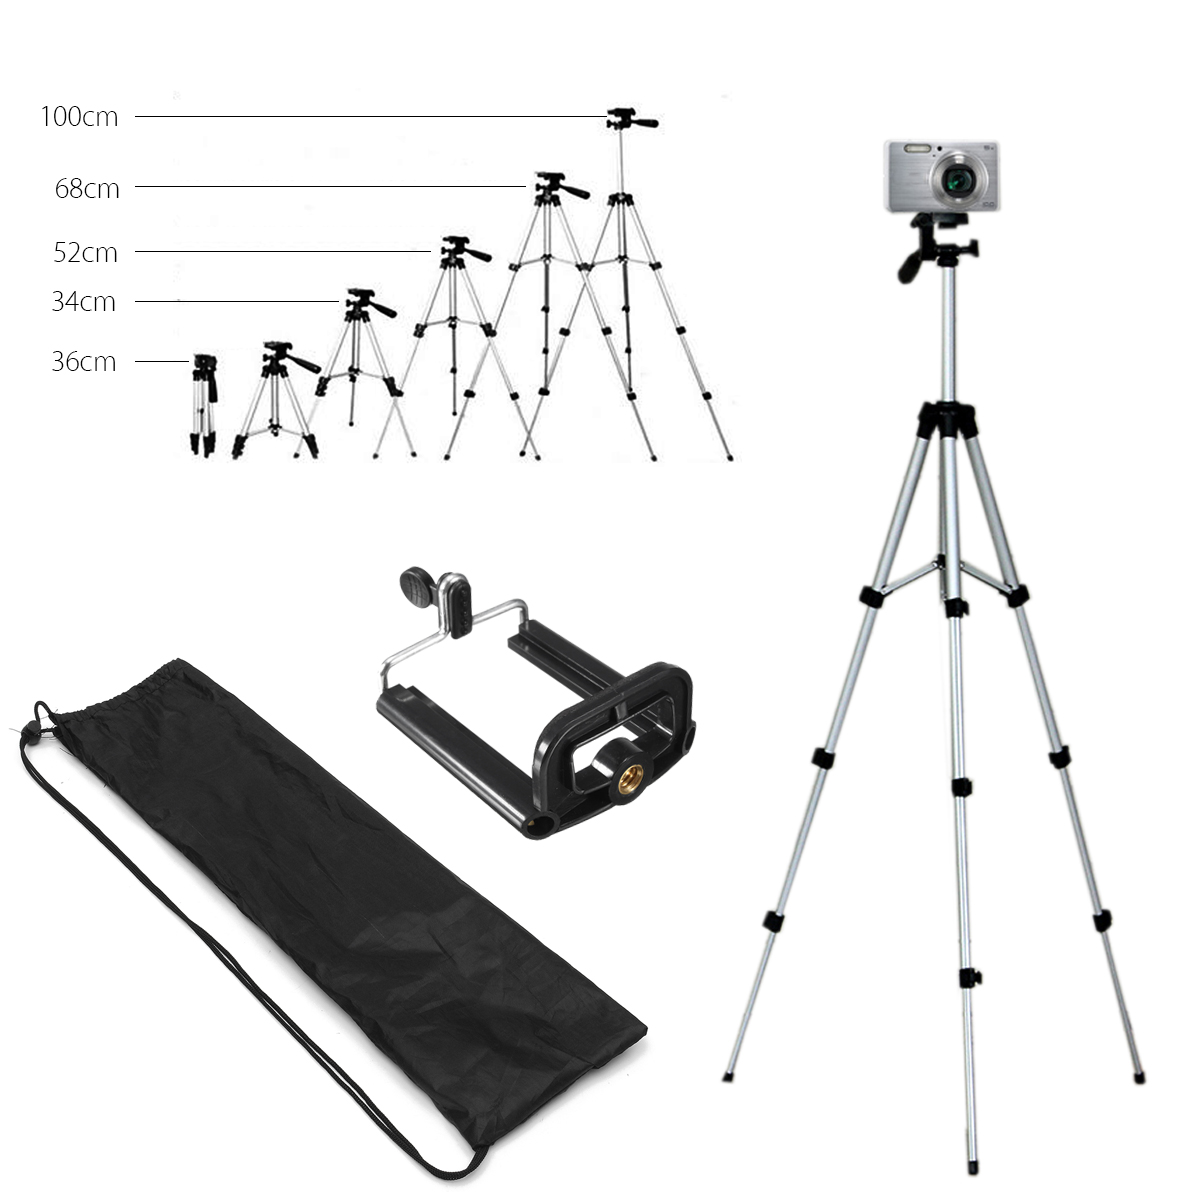 Bakeey-Professional-Camera-Adjustable-Tripod-Stand-Holder-Live-Selfie-Stick-for-iPhone-8-Plus-X-S8-S-1134052-5